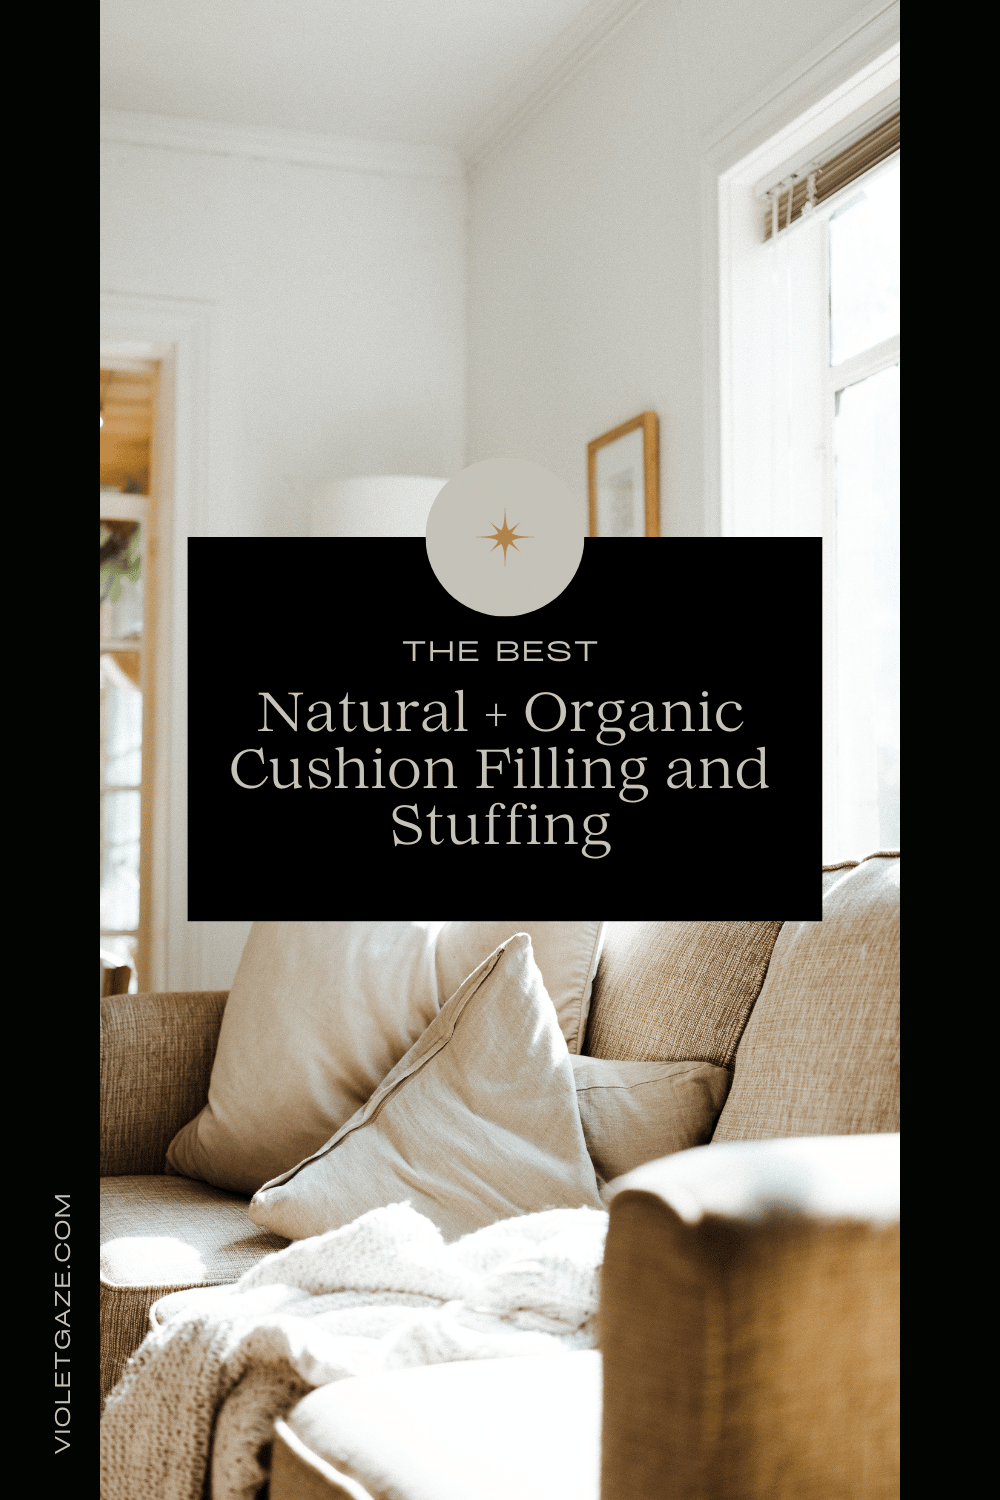 the best natural + organic cushion filling and stuffing